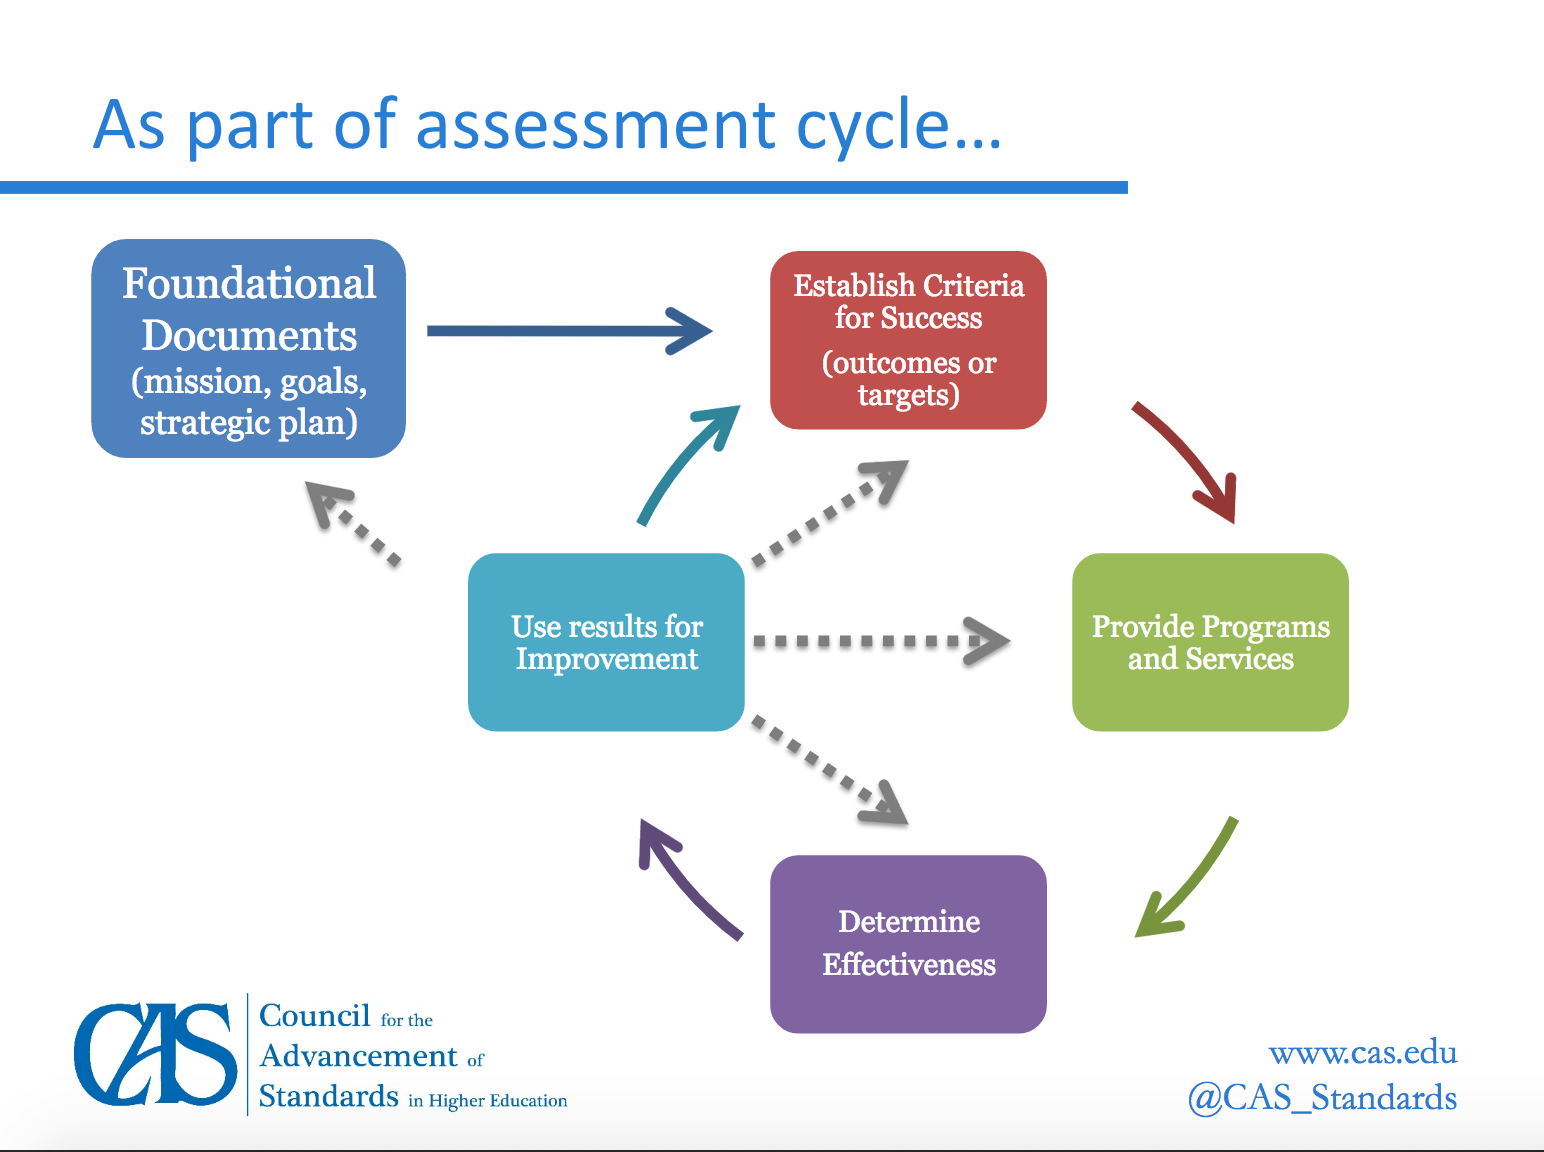 Council for the Advancement of Standards assessment cycle